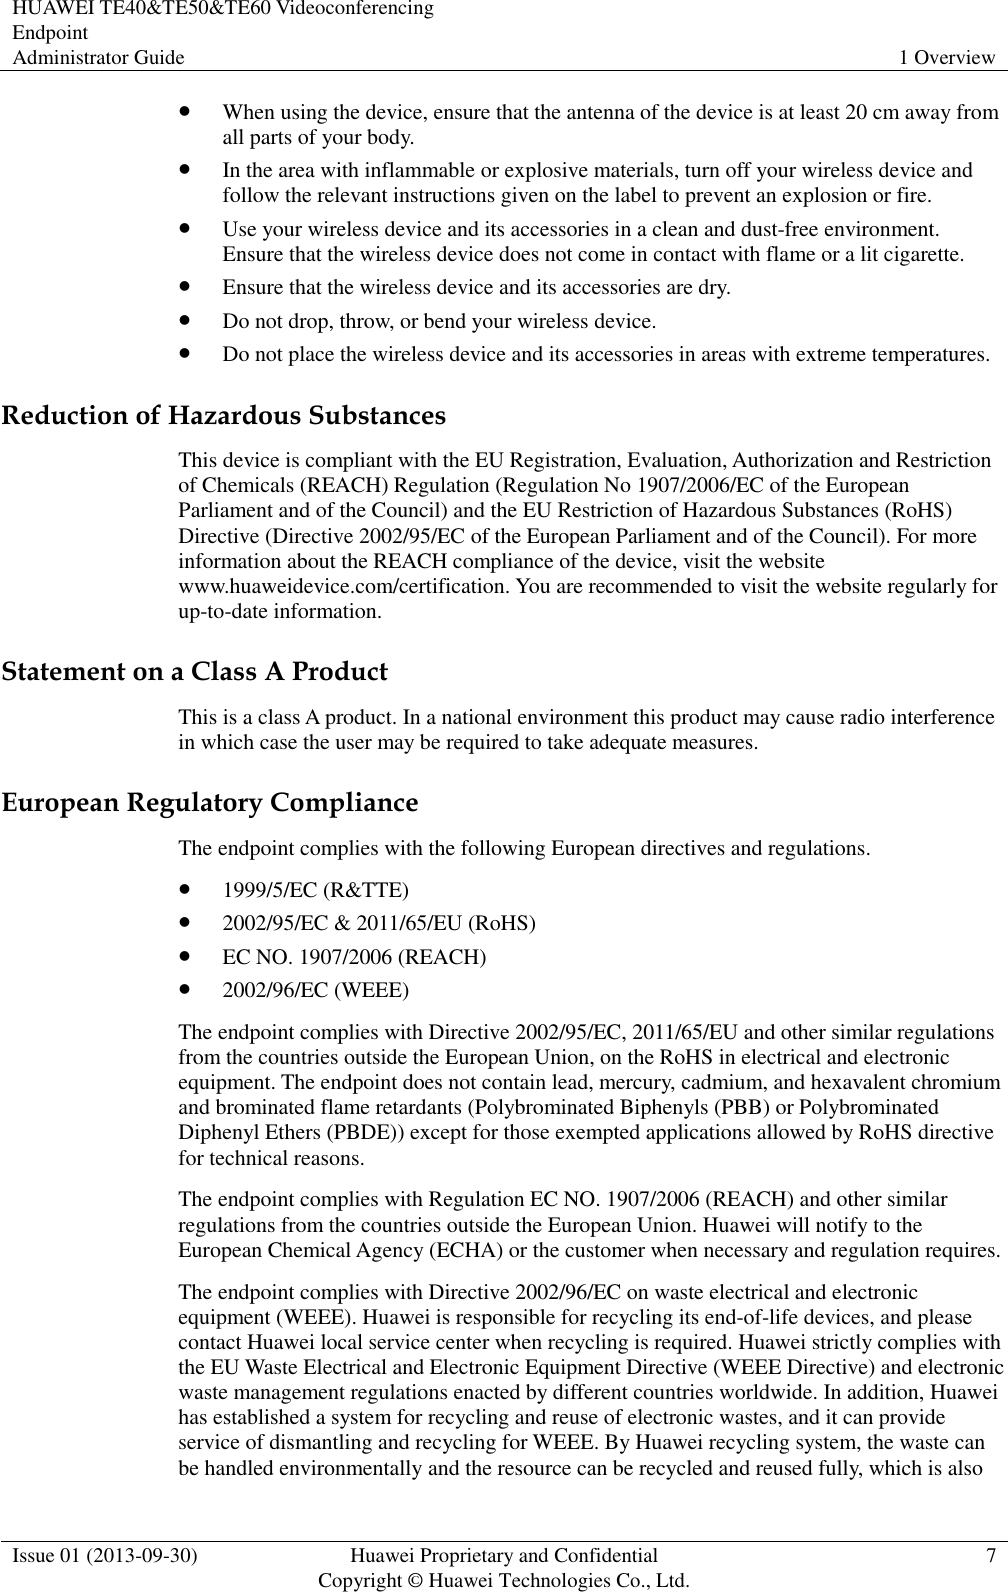 HUAWEI TE40&amp;TE50&amp;TE60 Videoconferencing Endpoint Administrator Guide 1 Overview  Issue 01 (2013-09-30) Huawei Proprietary and Confidential                                     Copyright © Huawei Technologies Co., Ltd. 7   When using the device, ensure that the antenna of the device is at least 20 cm away from all parts of your body.  In the area with inflammable or explosive materials, turn off your wireless device and follow the relevant instructions given on the label to prevent an explosion or fire.  Use your wireless device and its accessories in a clean and dust-free environment. Ensure that the wireless device does not come in contact with flame or a lit cigarette.  Ensure that the wireless device and its accessories are dry.  Do not drop, throw, or bend your wireless device.  Do not place the wireless device and its accessories in areas with extreme temperatures. Reduction of Hazardous Substances This device is compliant with the EU Registration, Evaluation, Authorization and Restriction of Chemicals (REACH) Regulation (Regulation No 1907/2006/EC of the European Parliament and of the Council) and the EU Restriction of Hazardous Substances (RoHS) Directive (Directive 2002/95/EC of the European Parliament and of the Council). For more information about the REACH compliance of the device, visit the website www.huaweidevice.com/certification. You are recommended to visit the website regularly for up-to-date information. Statement on a Class A Product This is a class A product. In a national environment this product may cause radio interference in which case the user may be required to take adequate measures.   European Regulatory Compliance The endpoint complies with the following European directives and regulations.  1999/5/EC (R&amp;TTE)  2002/95/EC &amp; 2011/65/EU (RoHS)  EC NO. 1907/2006 (REACH)  2002/96/EC (WEEE) The endpoint complies with Directive 2002/95/EC, 2011/65/EU and other similar regulations from the countries outside the European Union, on the RoHS in electrical and electronic equipment. The endpoint does not contain lead, mercury, cadmium, and hexavalent chromium and brominated flame retardants (Polybrominated Biphenyls (PBB) or Polybrominated Diphenyl Ethers (PBDE)) except for those exempted applications allowed by RoHS directive for technical reasons. The endpoint complies with Regulation EC NO. 1907/2006 (REACH) and other similar regulations from the countries outside the European Union. Huawei will notify to the European Chemical Agency (ECHA) or the customer when necessary and regulation requires. The endpoint complies with Directive 2002/96/EC on waste electrical and electronic equipment (WEEE). Huawei is responsible for recycling its end-of-life devices, and please contact Huawei local service center when recycling is required. Huawei strictly complies with the EU Waste Electrical and Electronic Equipment Directive (WEEE Directive) and electronic waste management regulations enacted by different countries worldwide. In addition, Huawei has established a system for recycling and reuse of electronic wastes, and it can provide service of dismantling and recycling for WEEE. By Huawei recycling system, the waste can be handled environmentally and the resource can be recycled and reused fully, which is also 